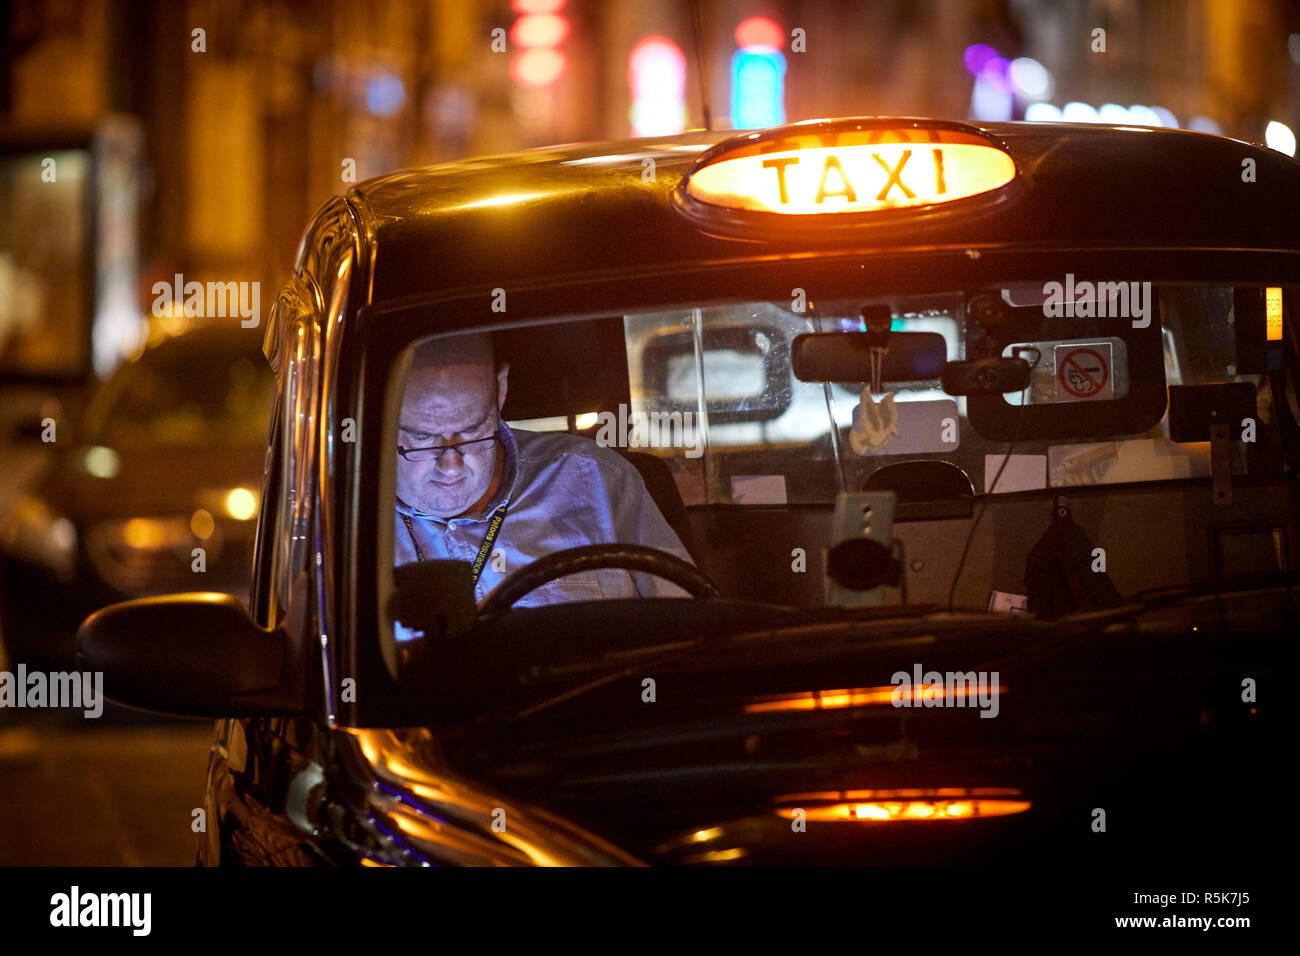 Liverpool city centre a late shift taxi driver resting using his mobile phone waiting in the rank Stock Photo